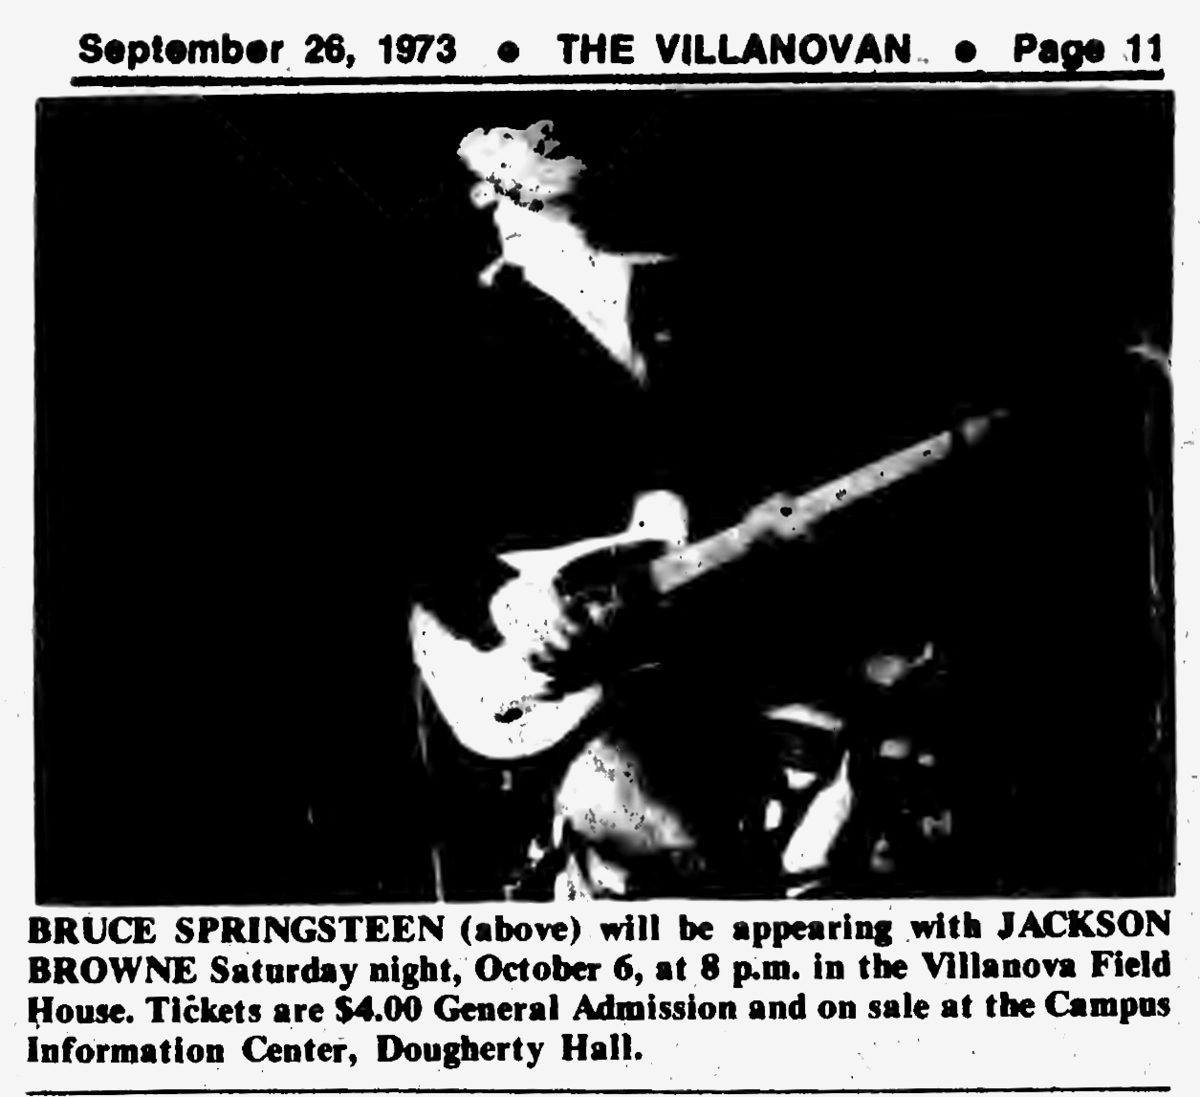 The Night The Boss Played for a Classroom: Springsteen at Villanova